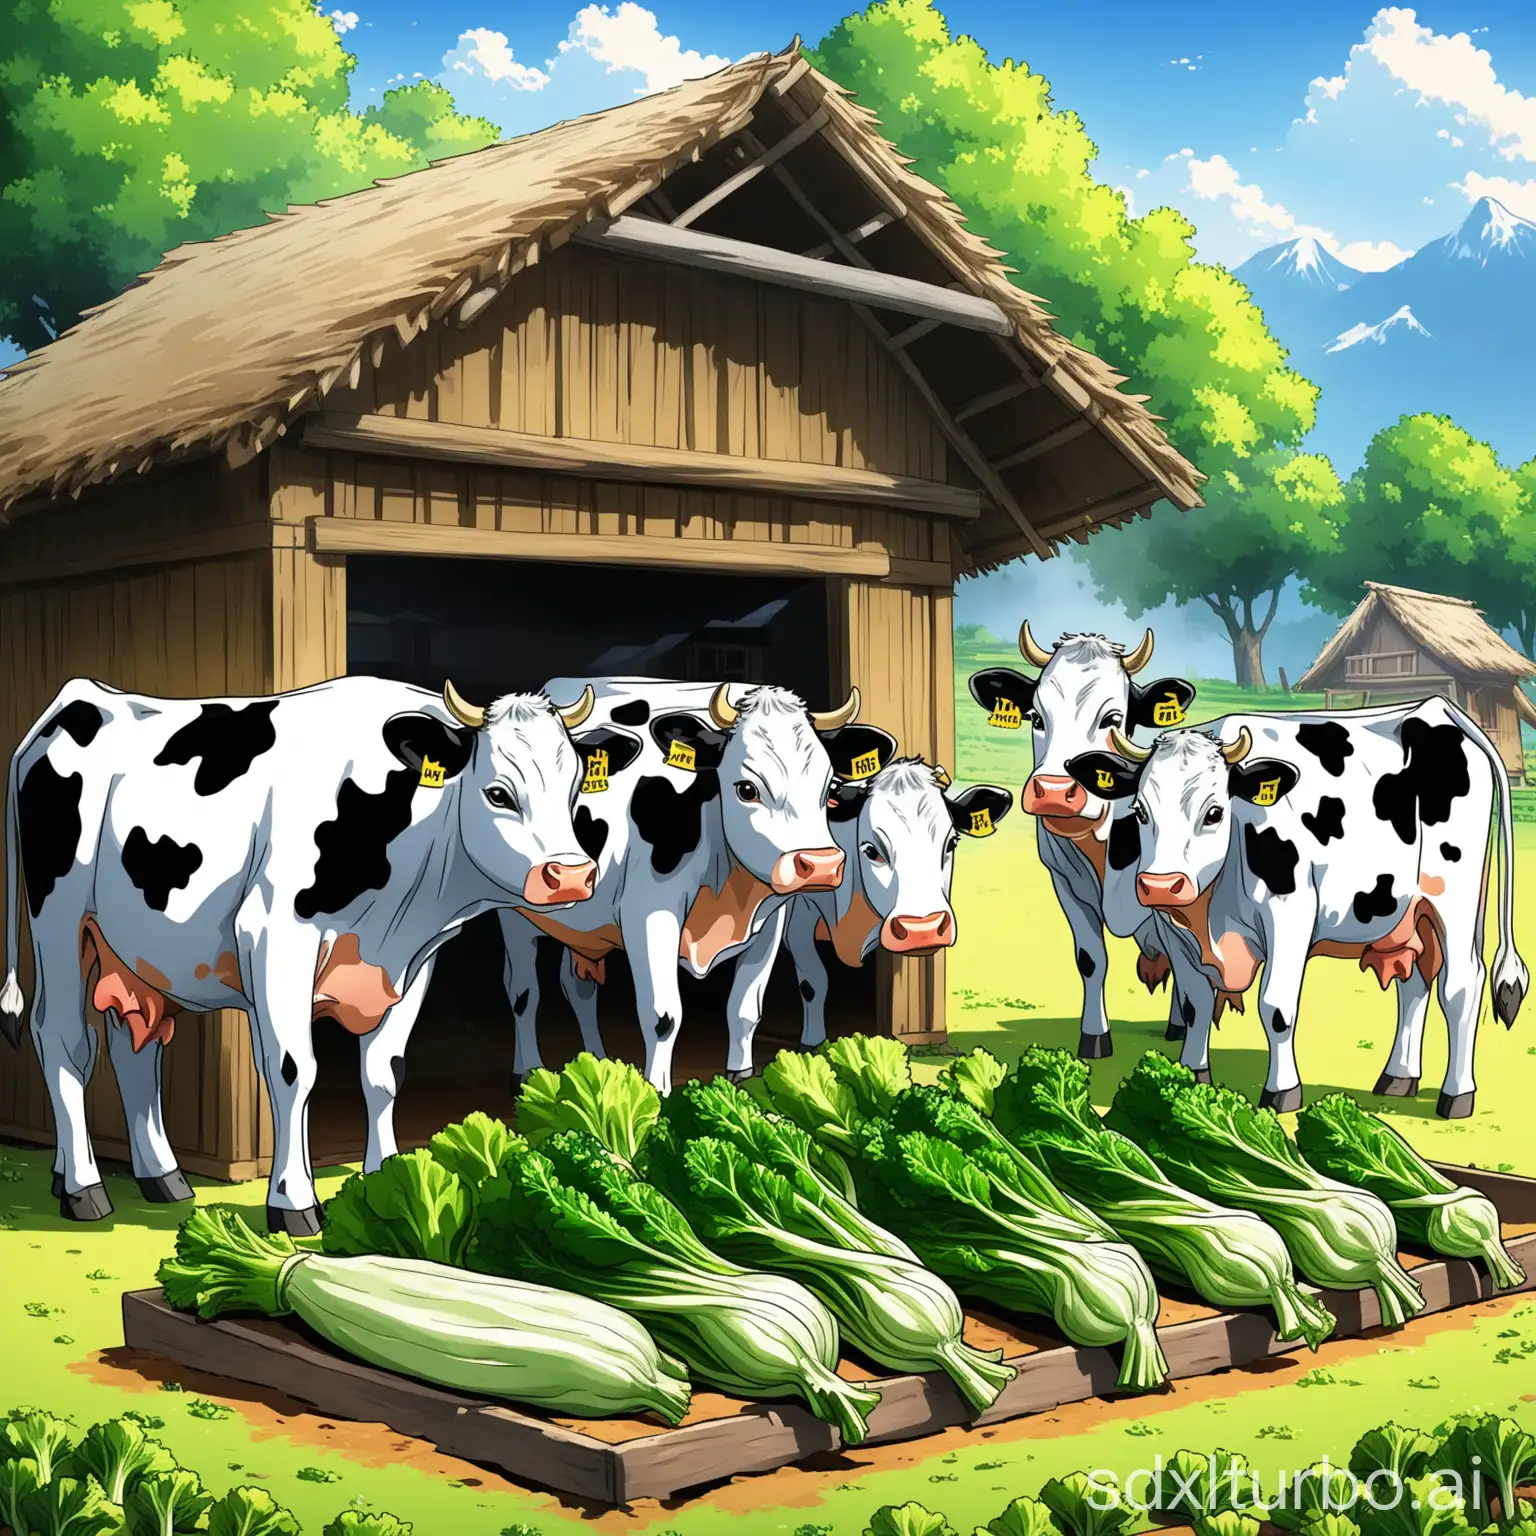 Cows-Grazing-on-Green-Vegetables-Near-a-Hut